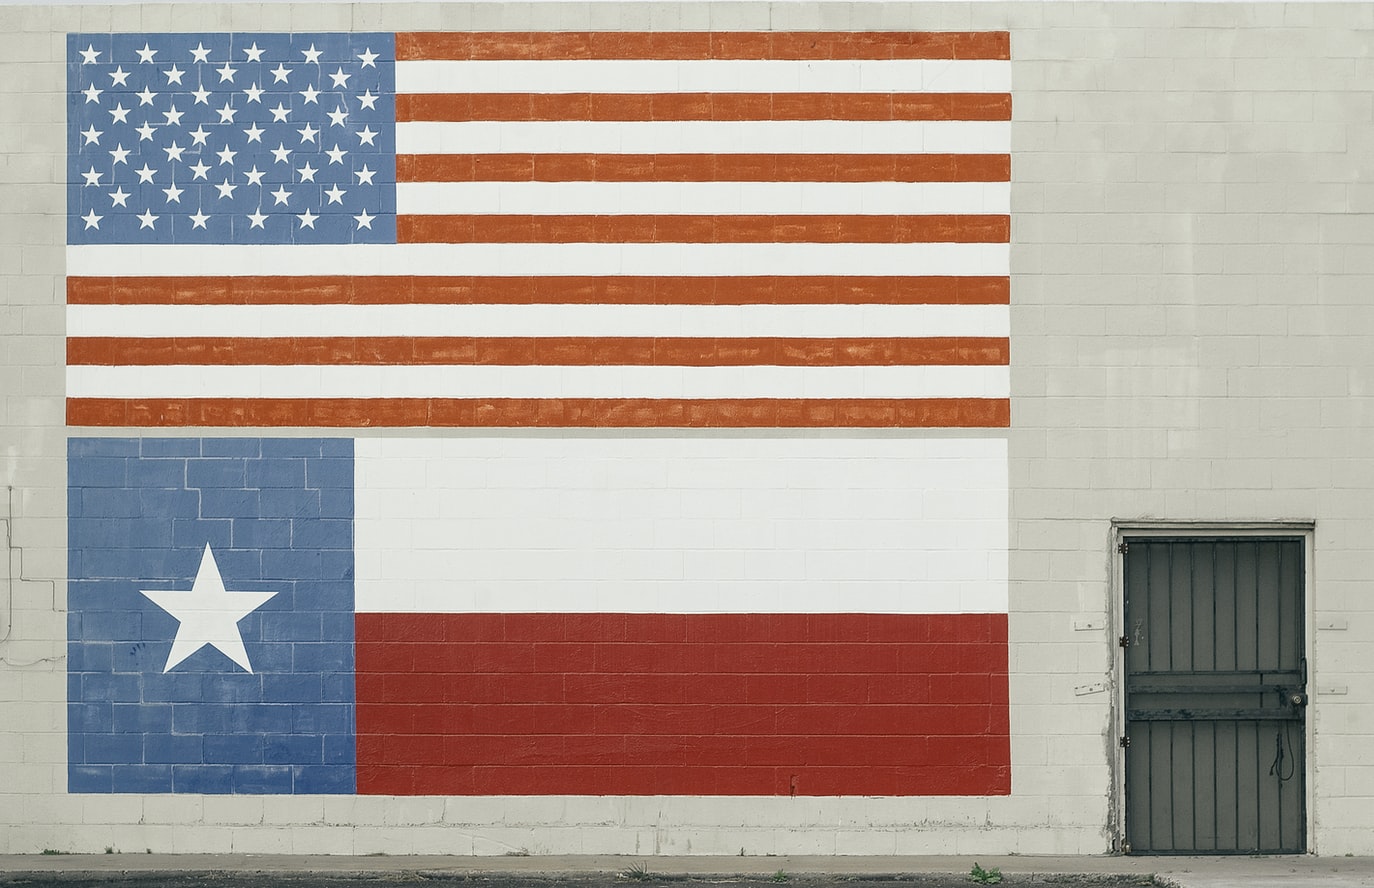 The flags of the United States of America and Texas painted on a wall